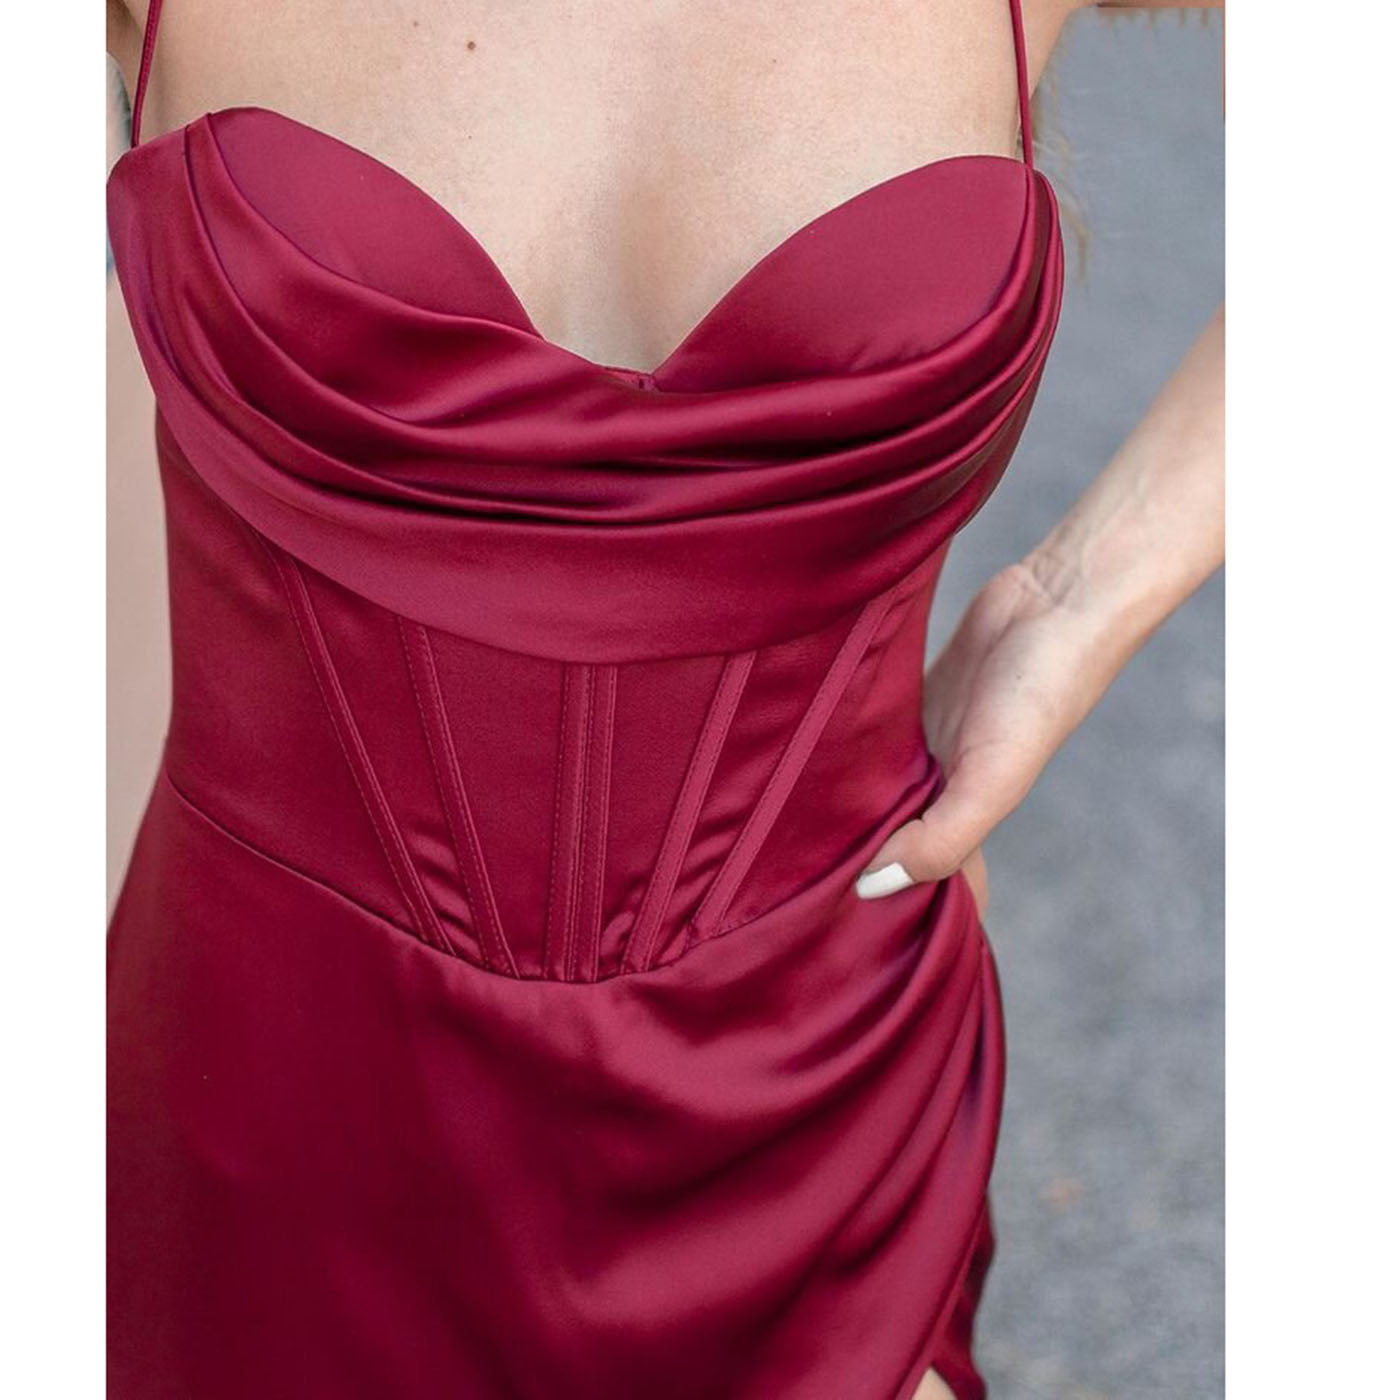 New Summer Prom Dress Women'S Sling Sleeveless Solid Color Dress One Word Neck Slim Fit Open Back Slit Red Sexy Dress   110.99 EZYSELLA SHOP